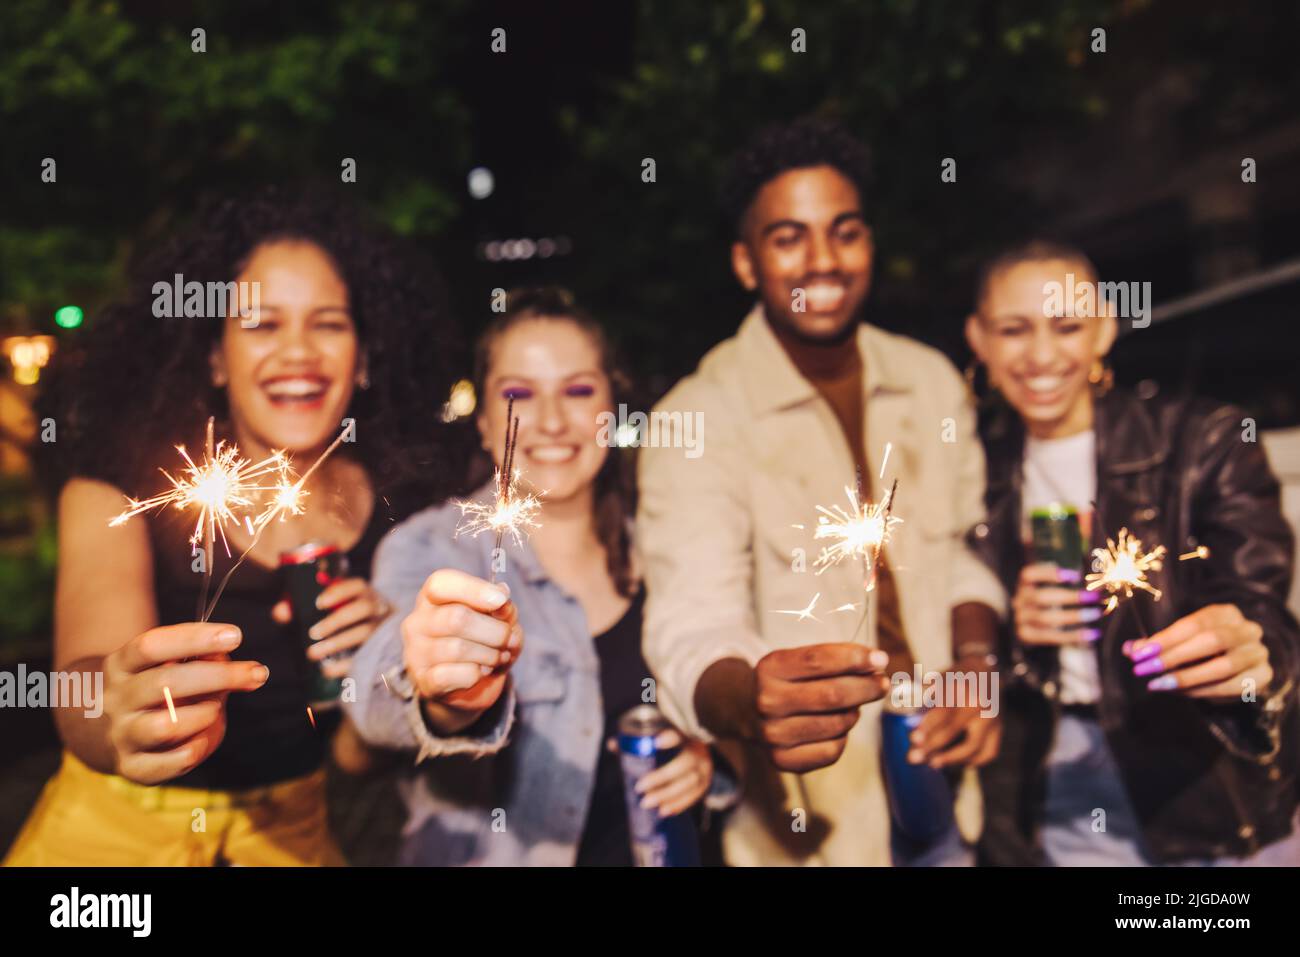 Bengal lights for the holiday season. Four happy young people holding up their sparklers at night. Group of cheerful friends having a good time while Stock Photo